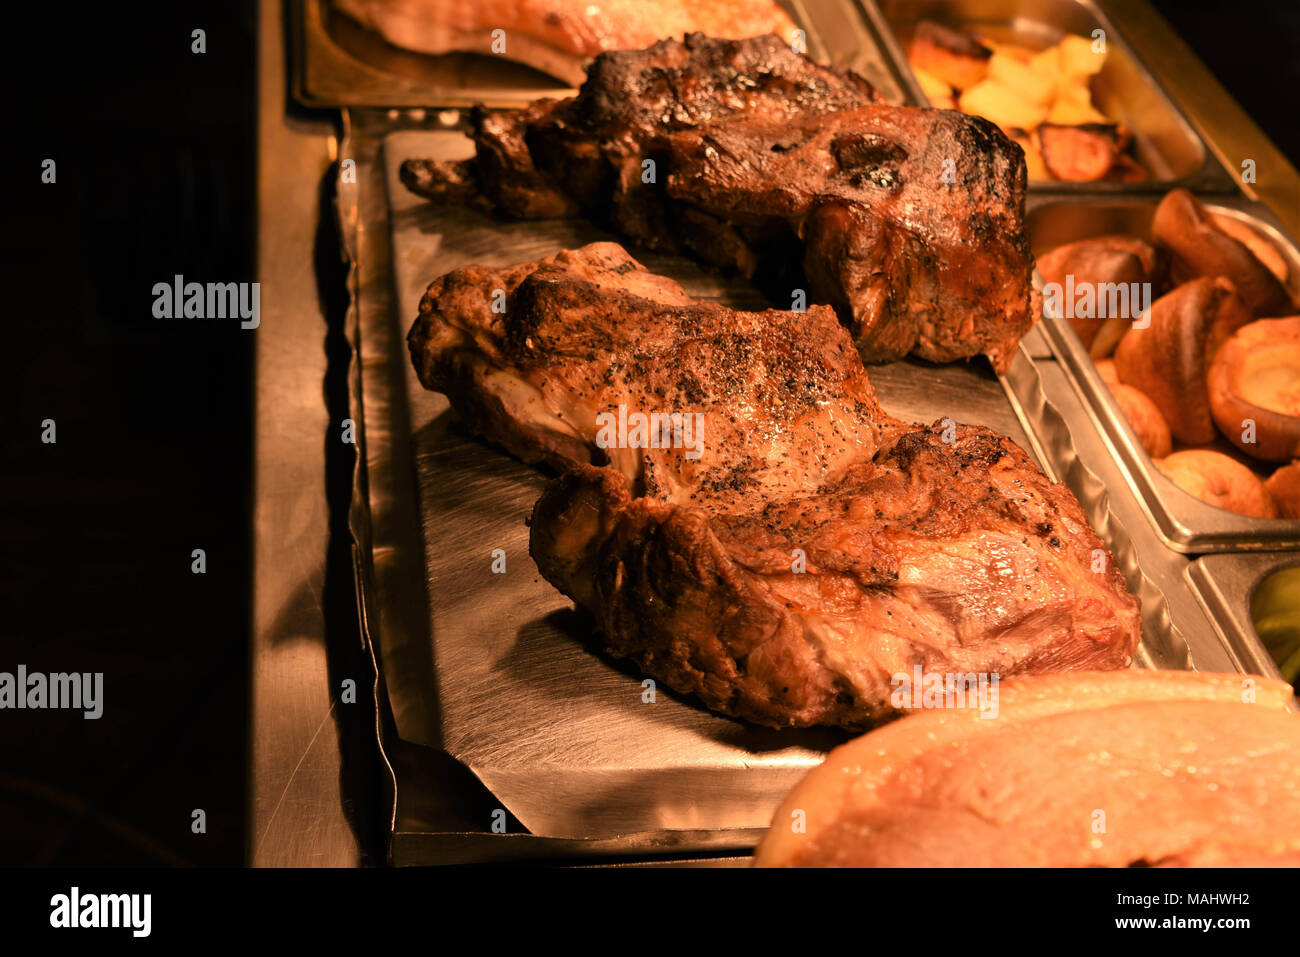 traditional roast lamb dinner with whole meats Stock Photo